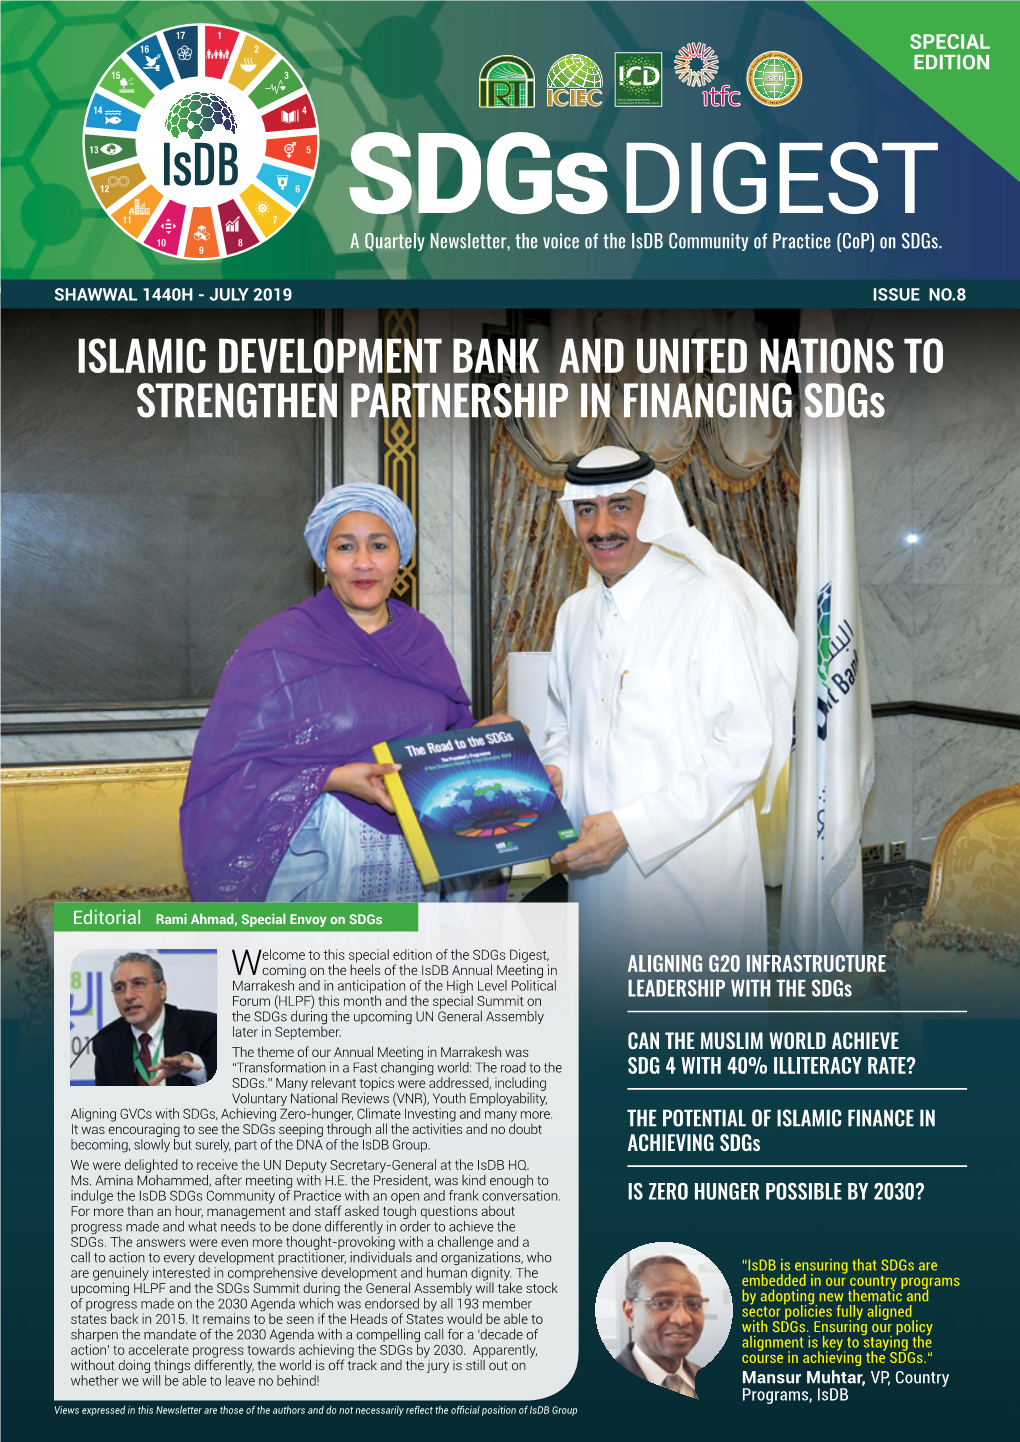 Sdgs DIGEST a Quartely Newsletter, the Voice of the Isdb Community of Practice (Cop) on Sdgs